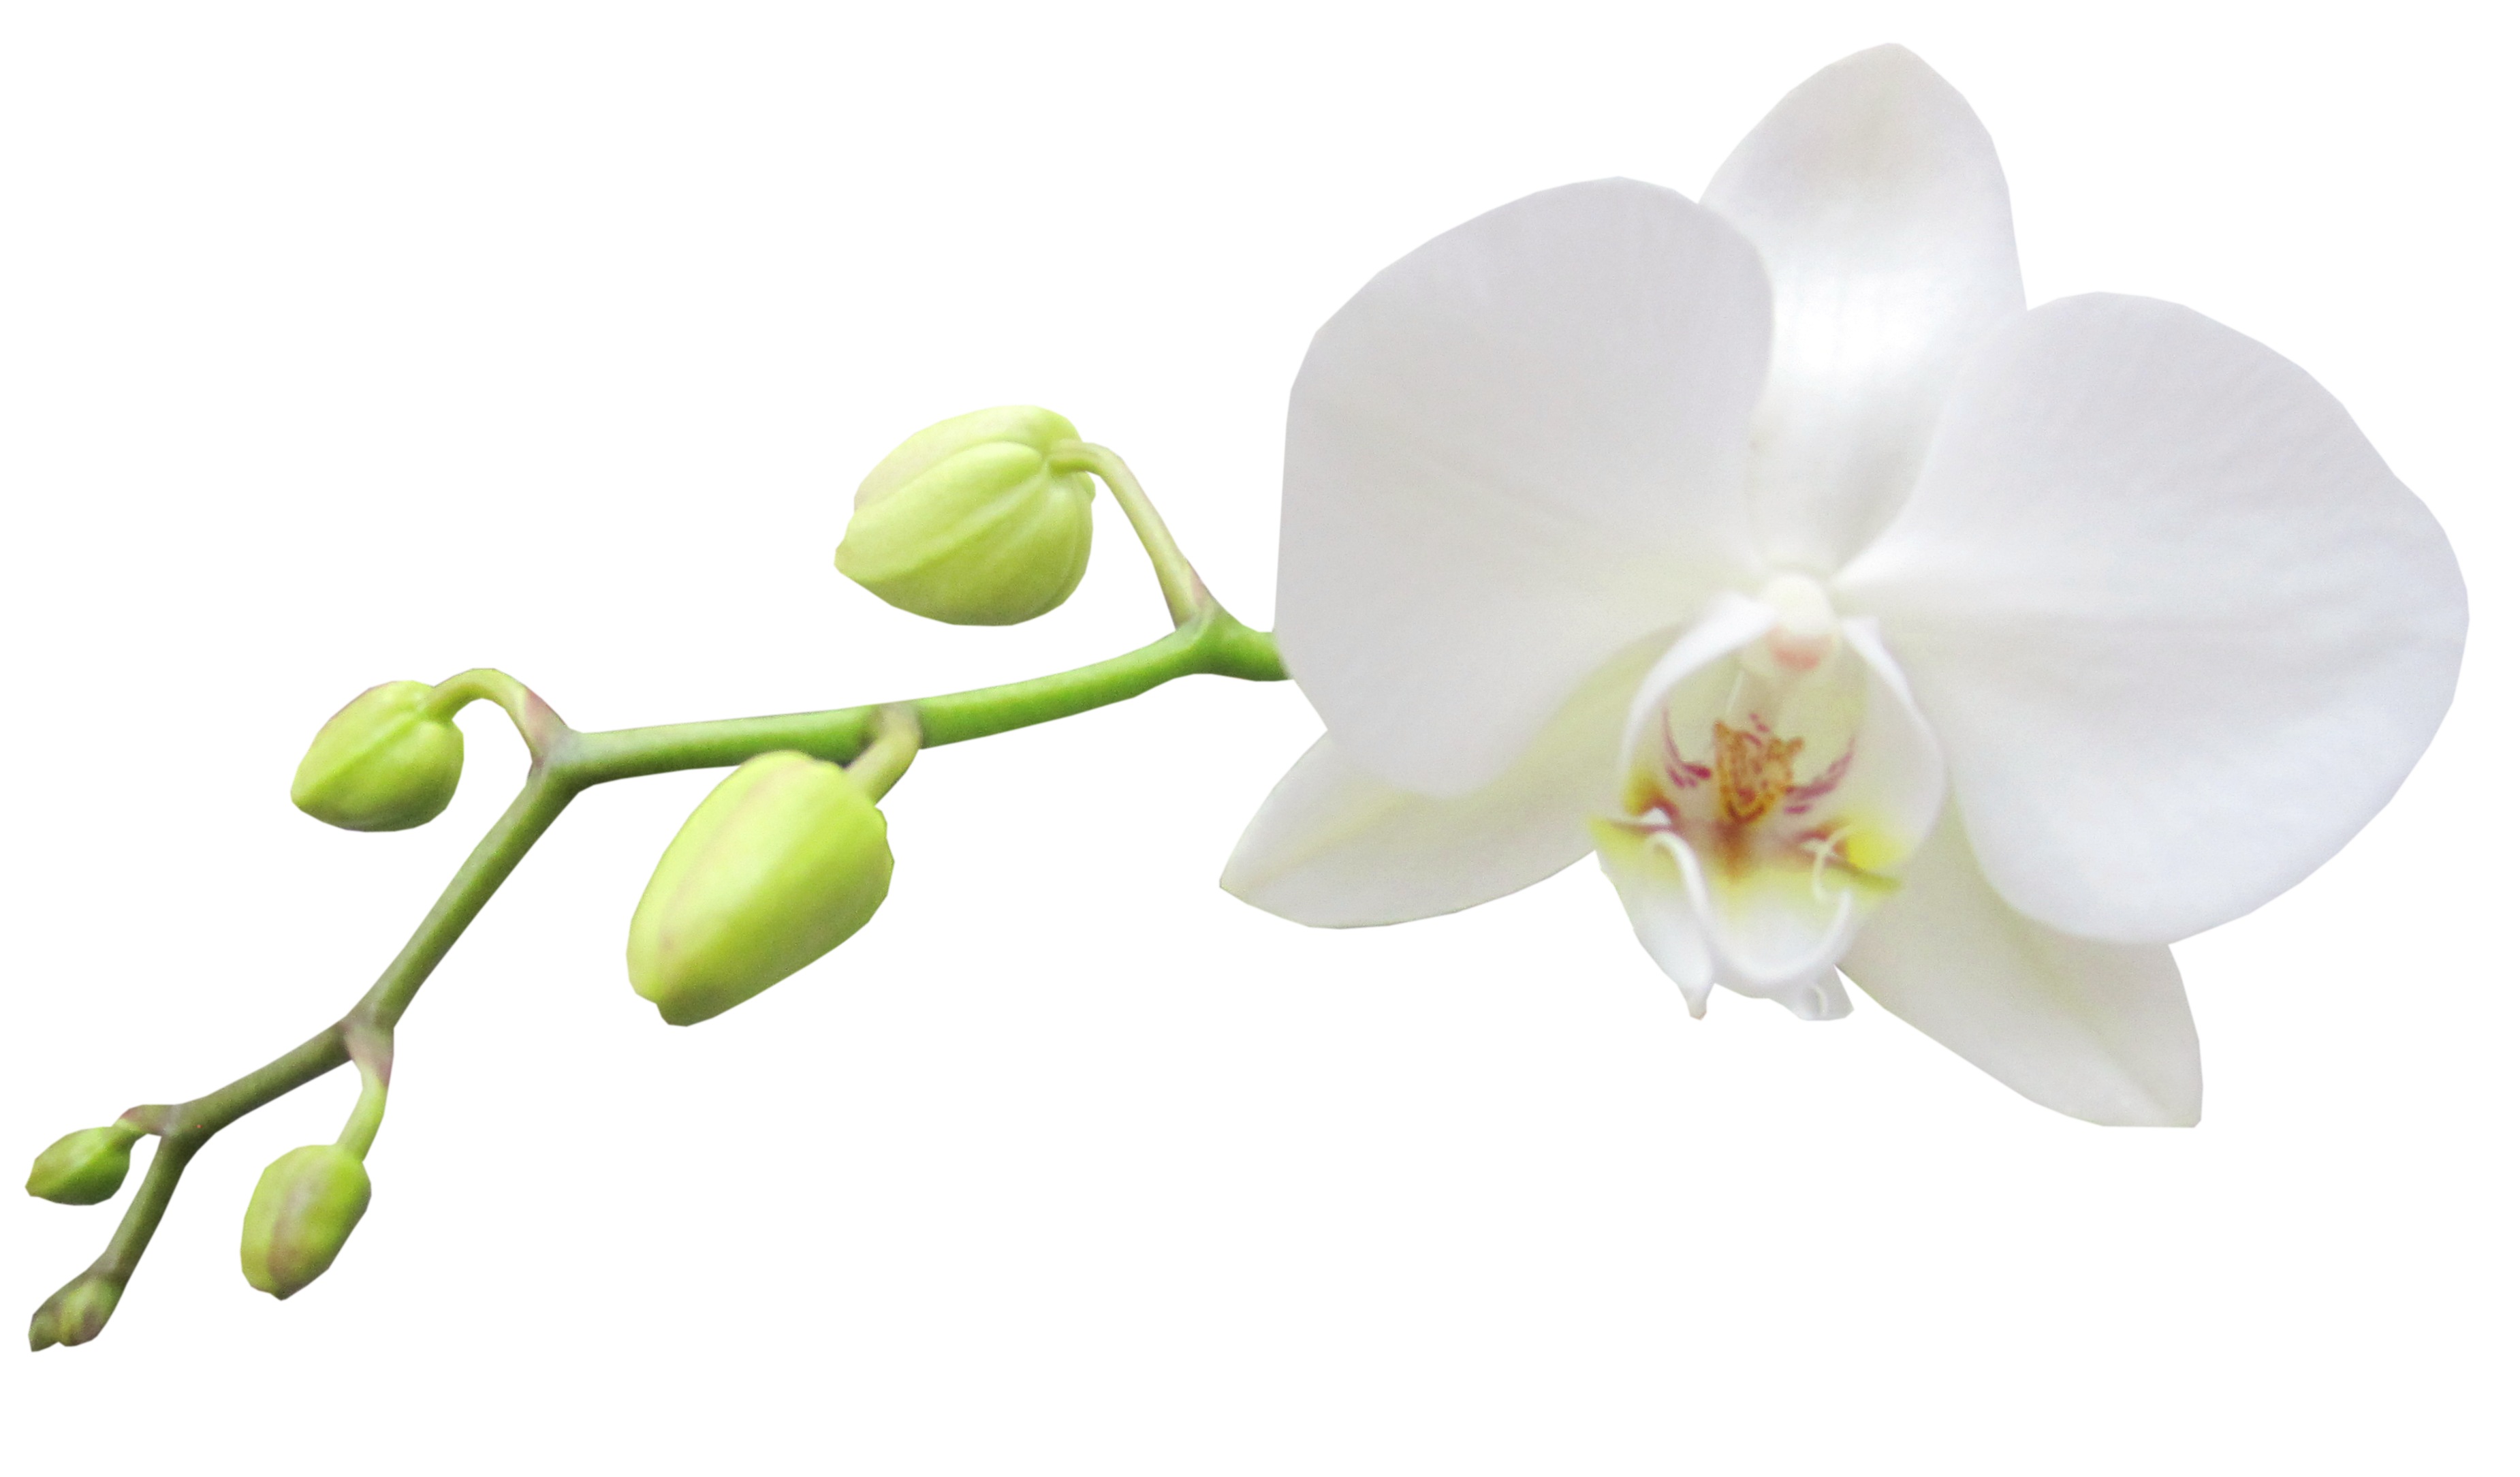 orchid clipart file